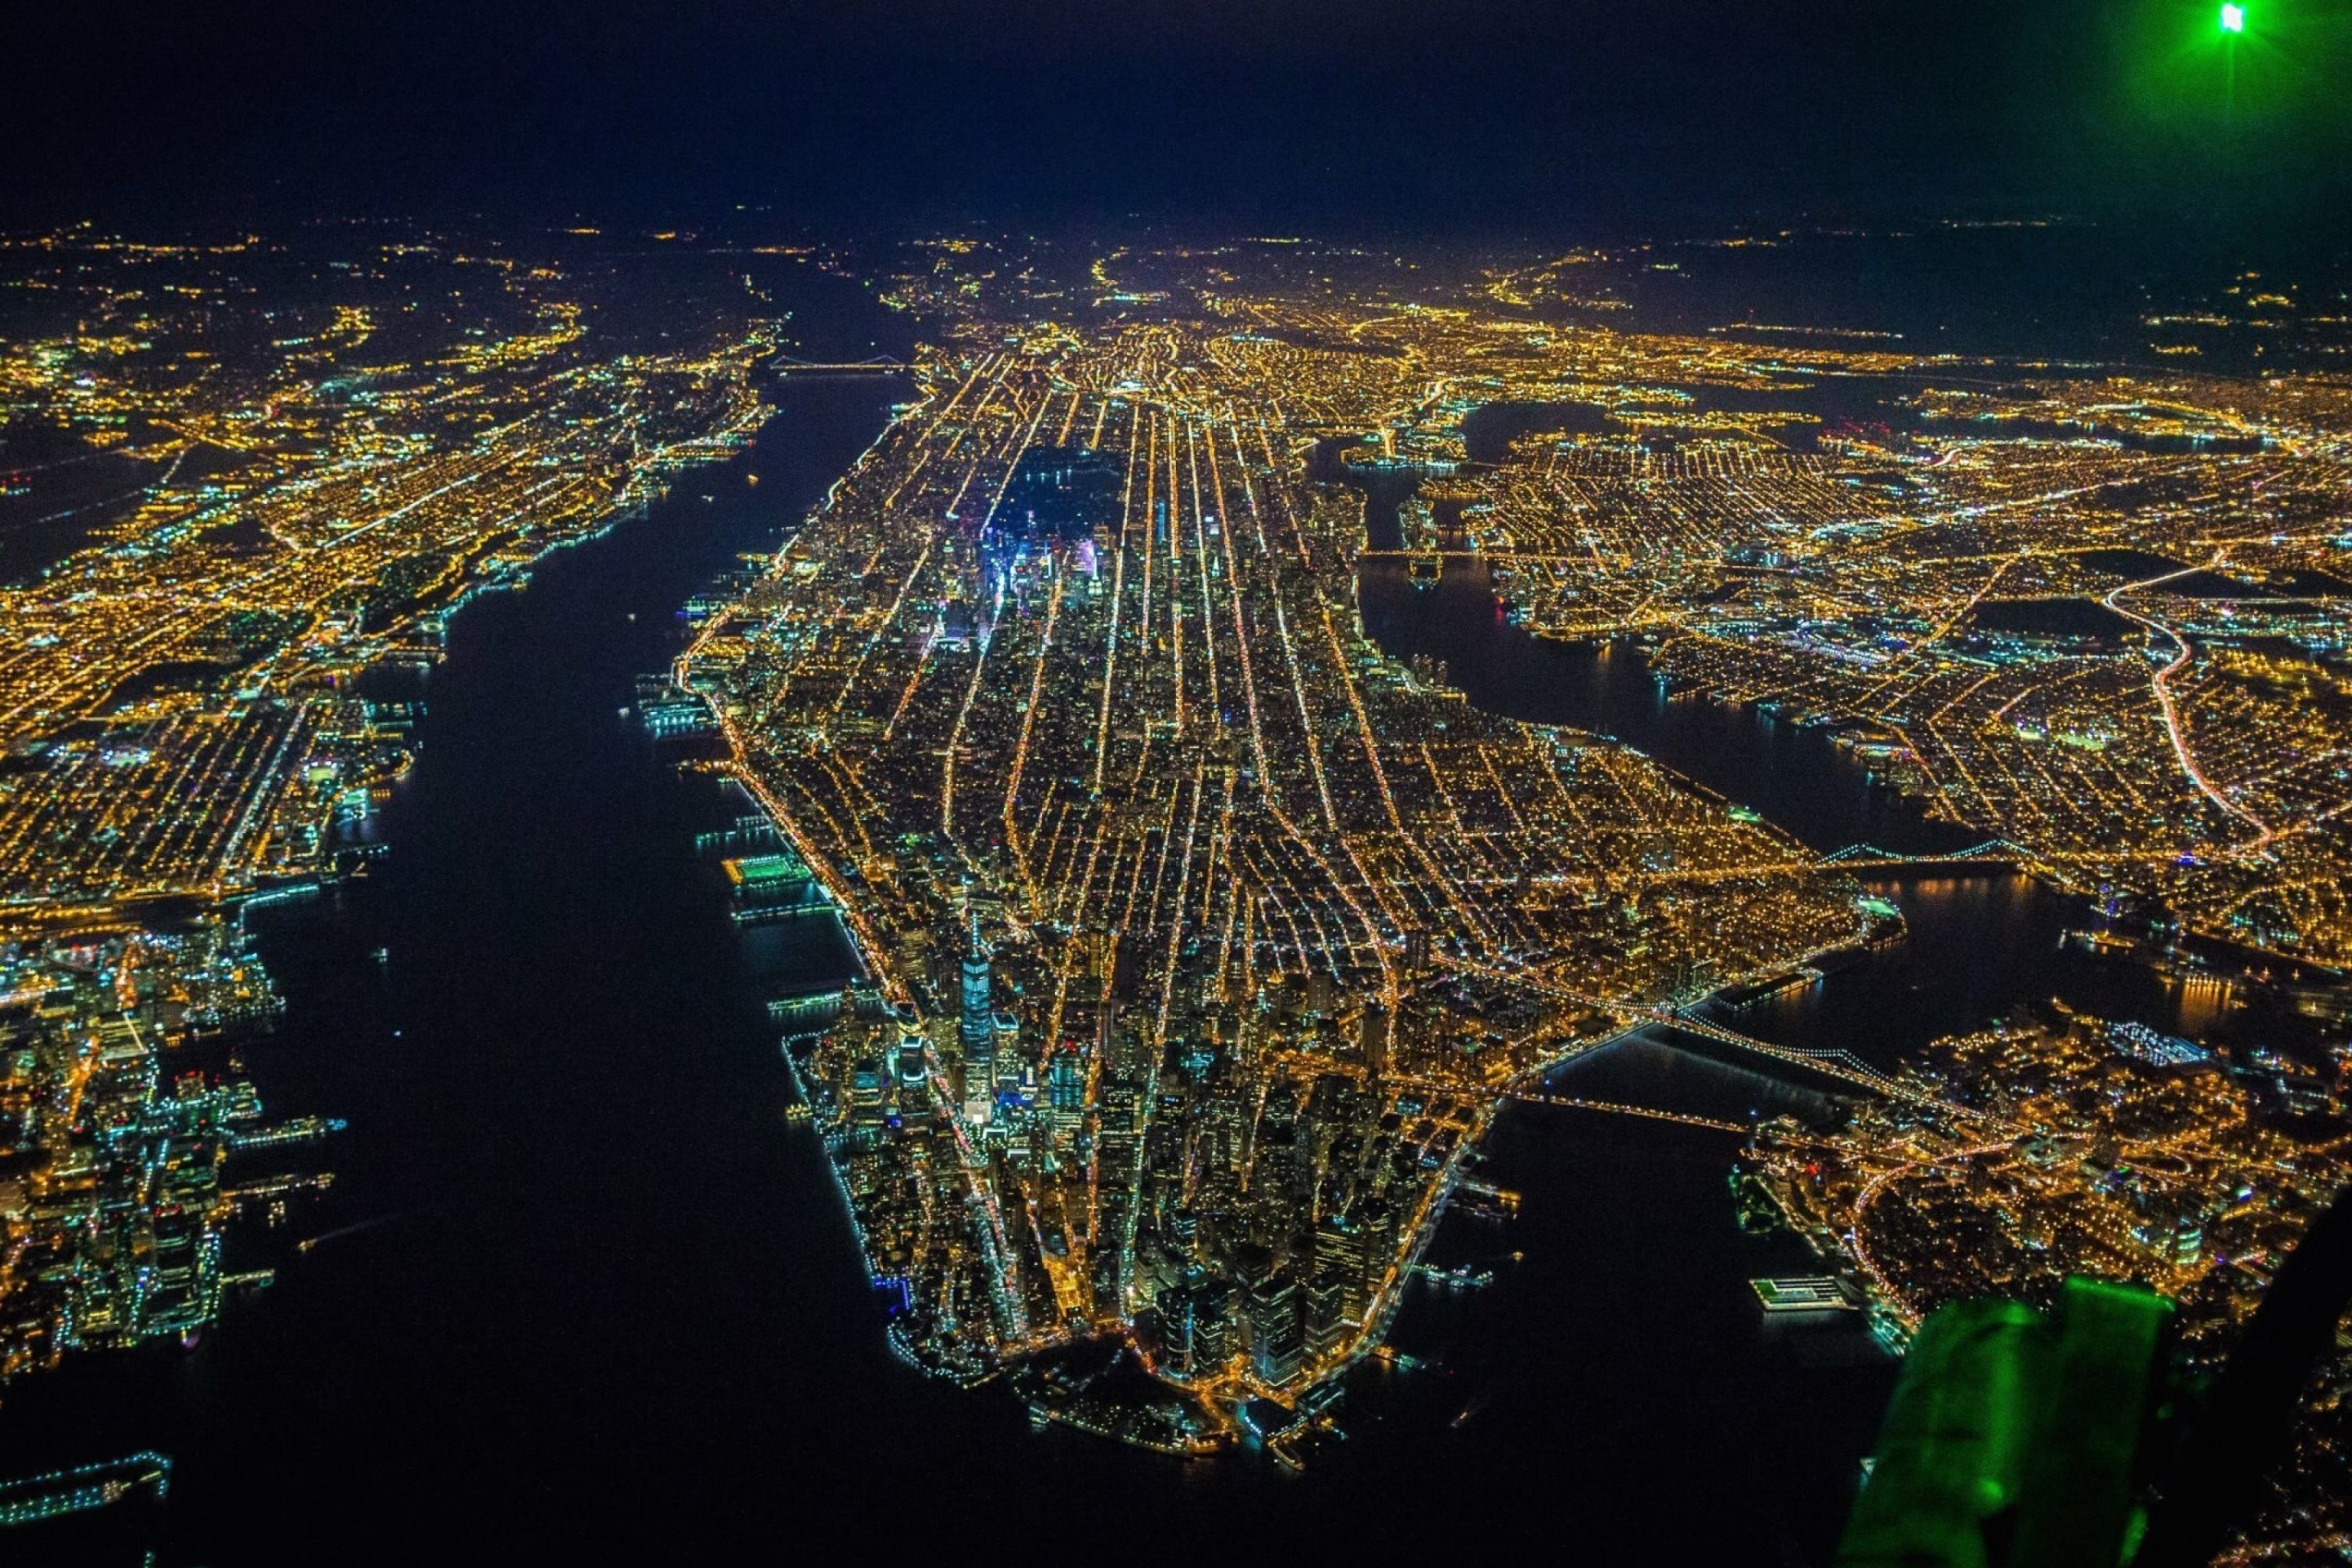 New York City Night View From Space wallpaper 2880x1920